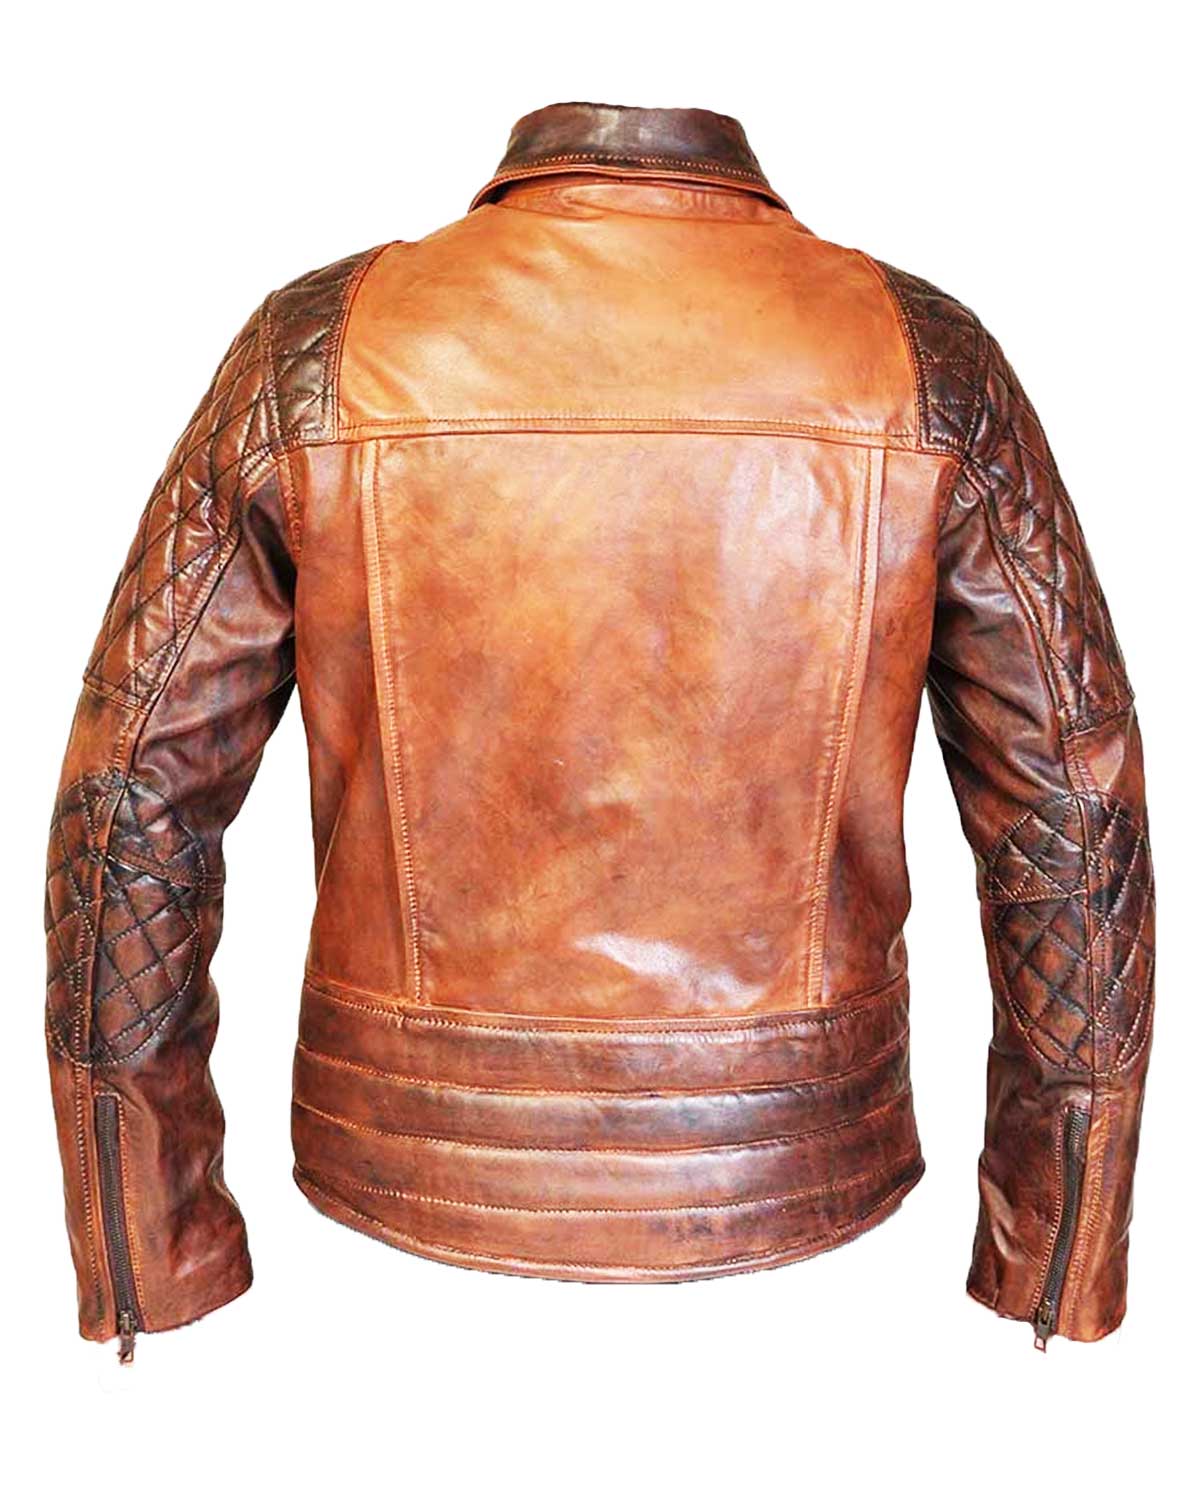 Mens Vintage Rustic Iconic Quilted Brown Leather Biker Jacket 